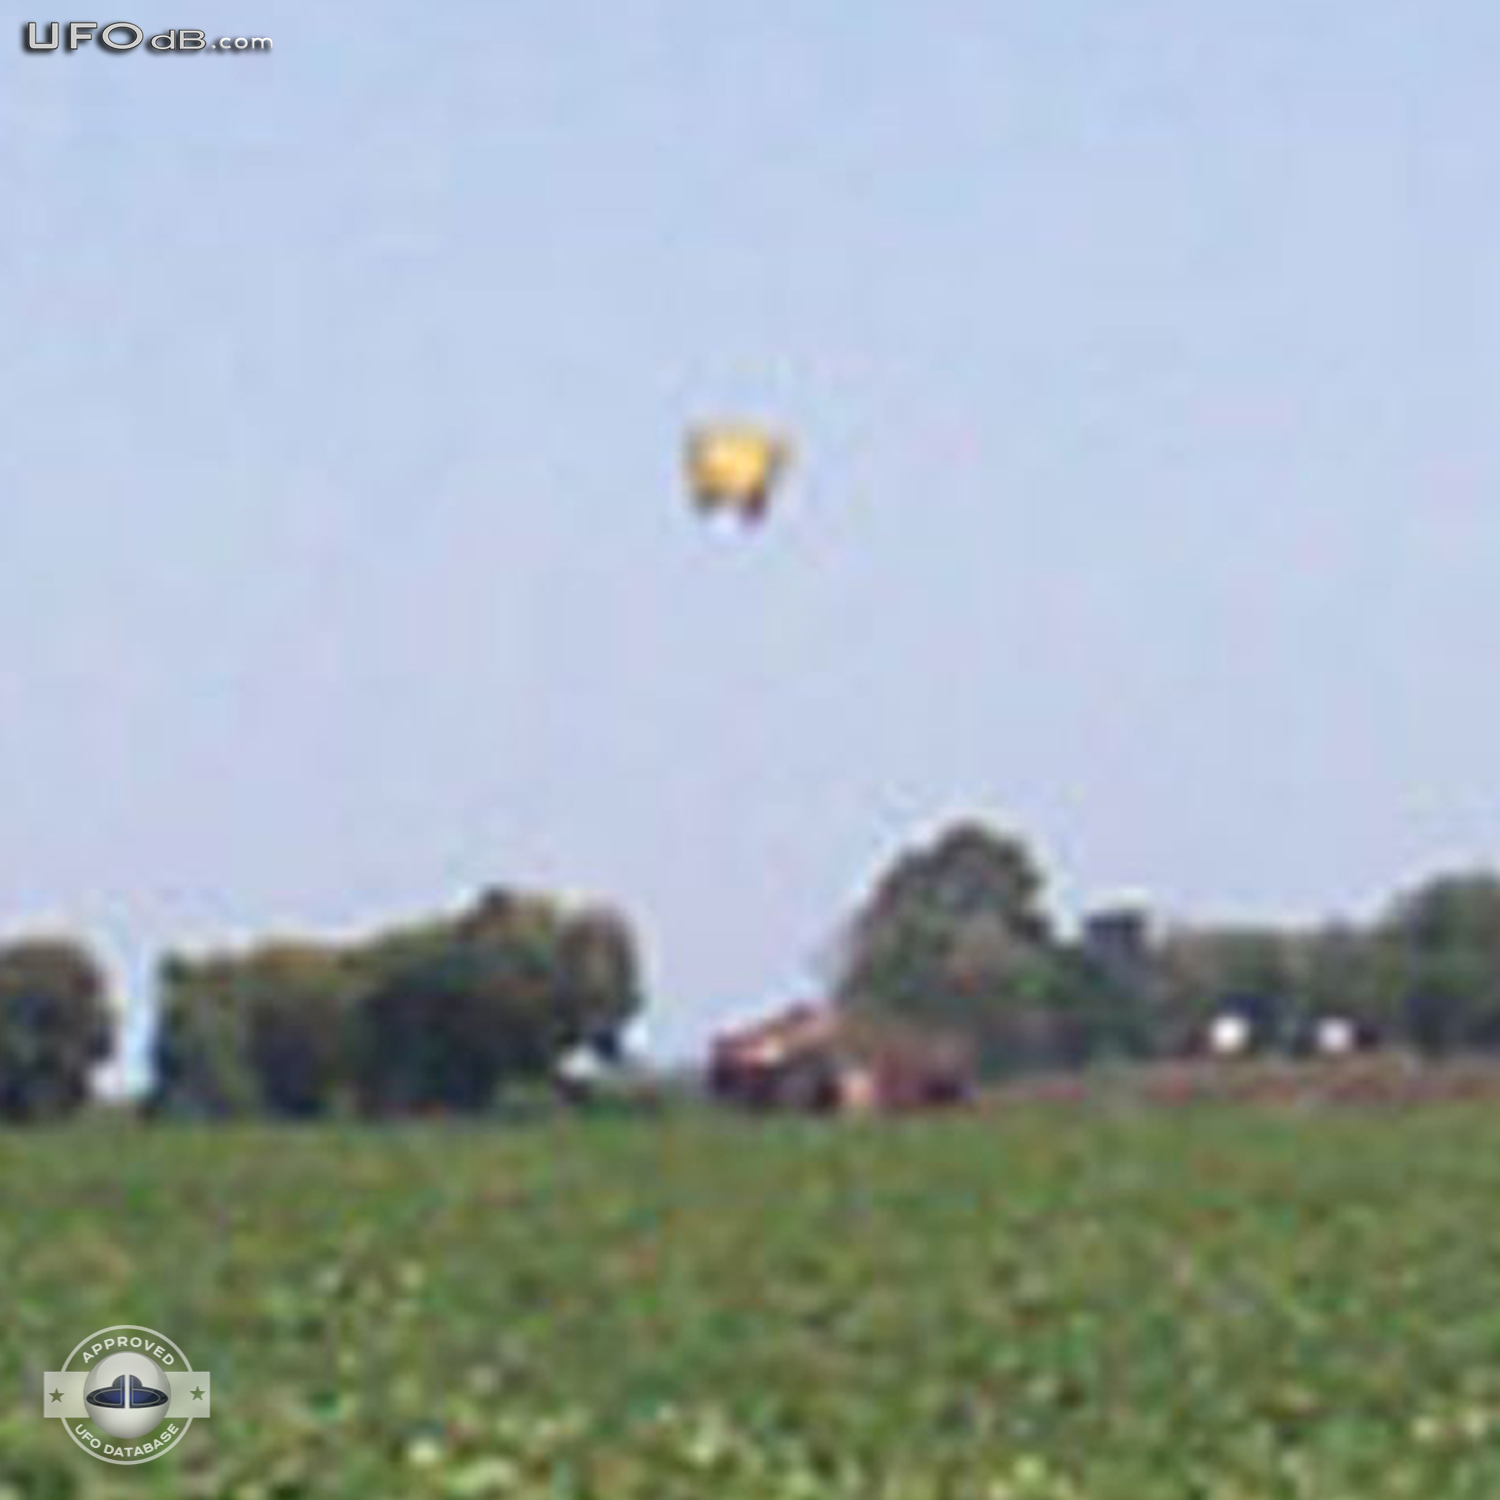 Family in Argentina blames a UFO for their sickness | February 28 2011 UFO Picture #271-4